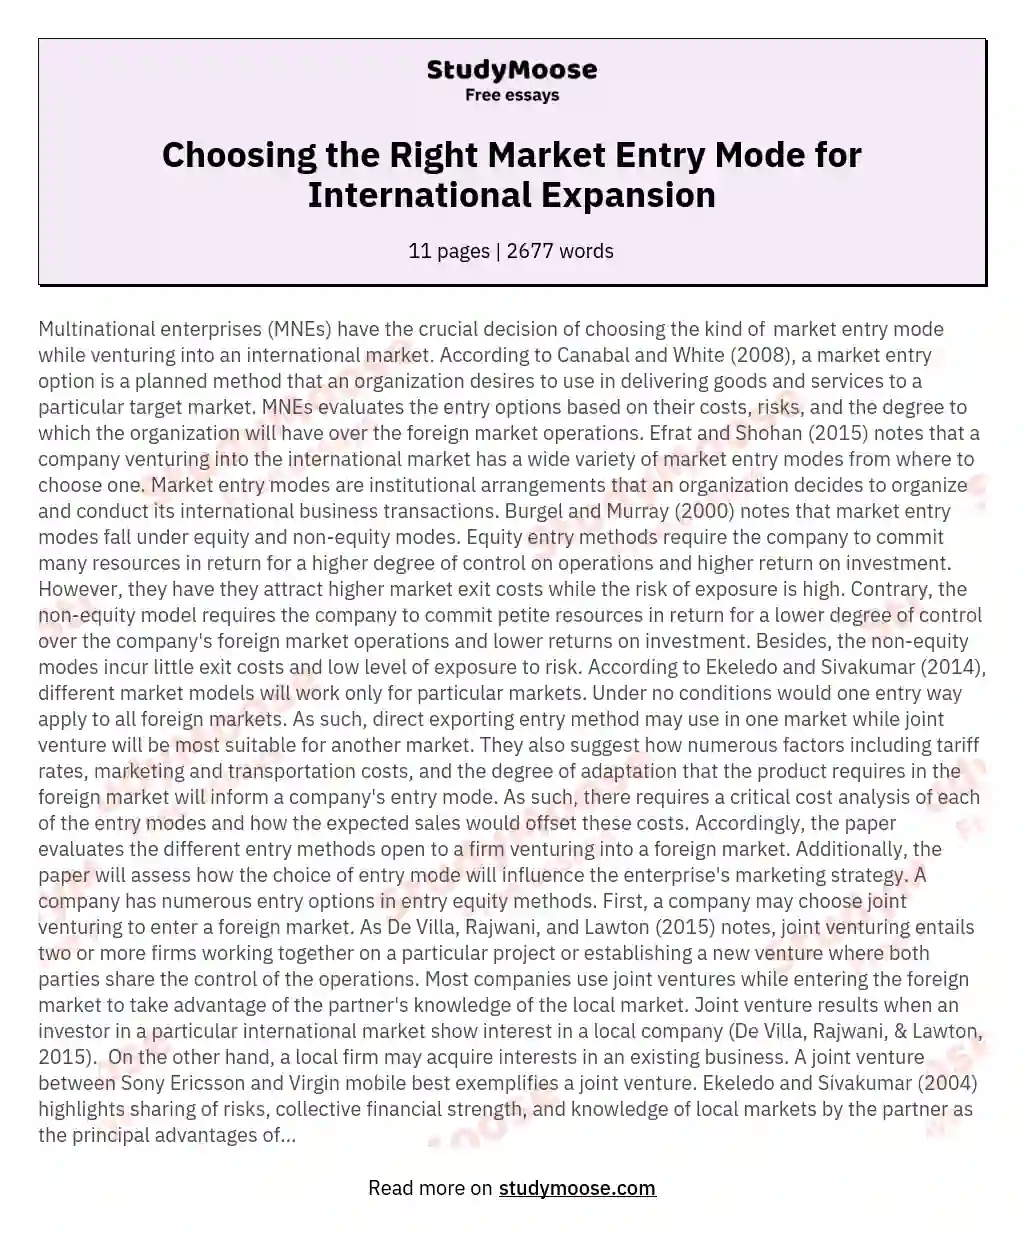 Choosing the Right Market Entry Mode for International Expansion essay